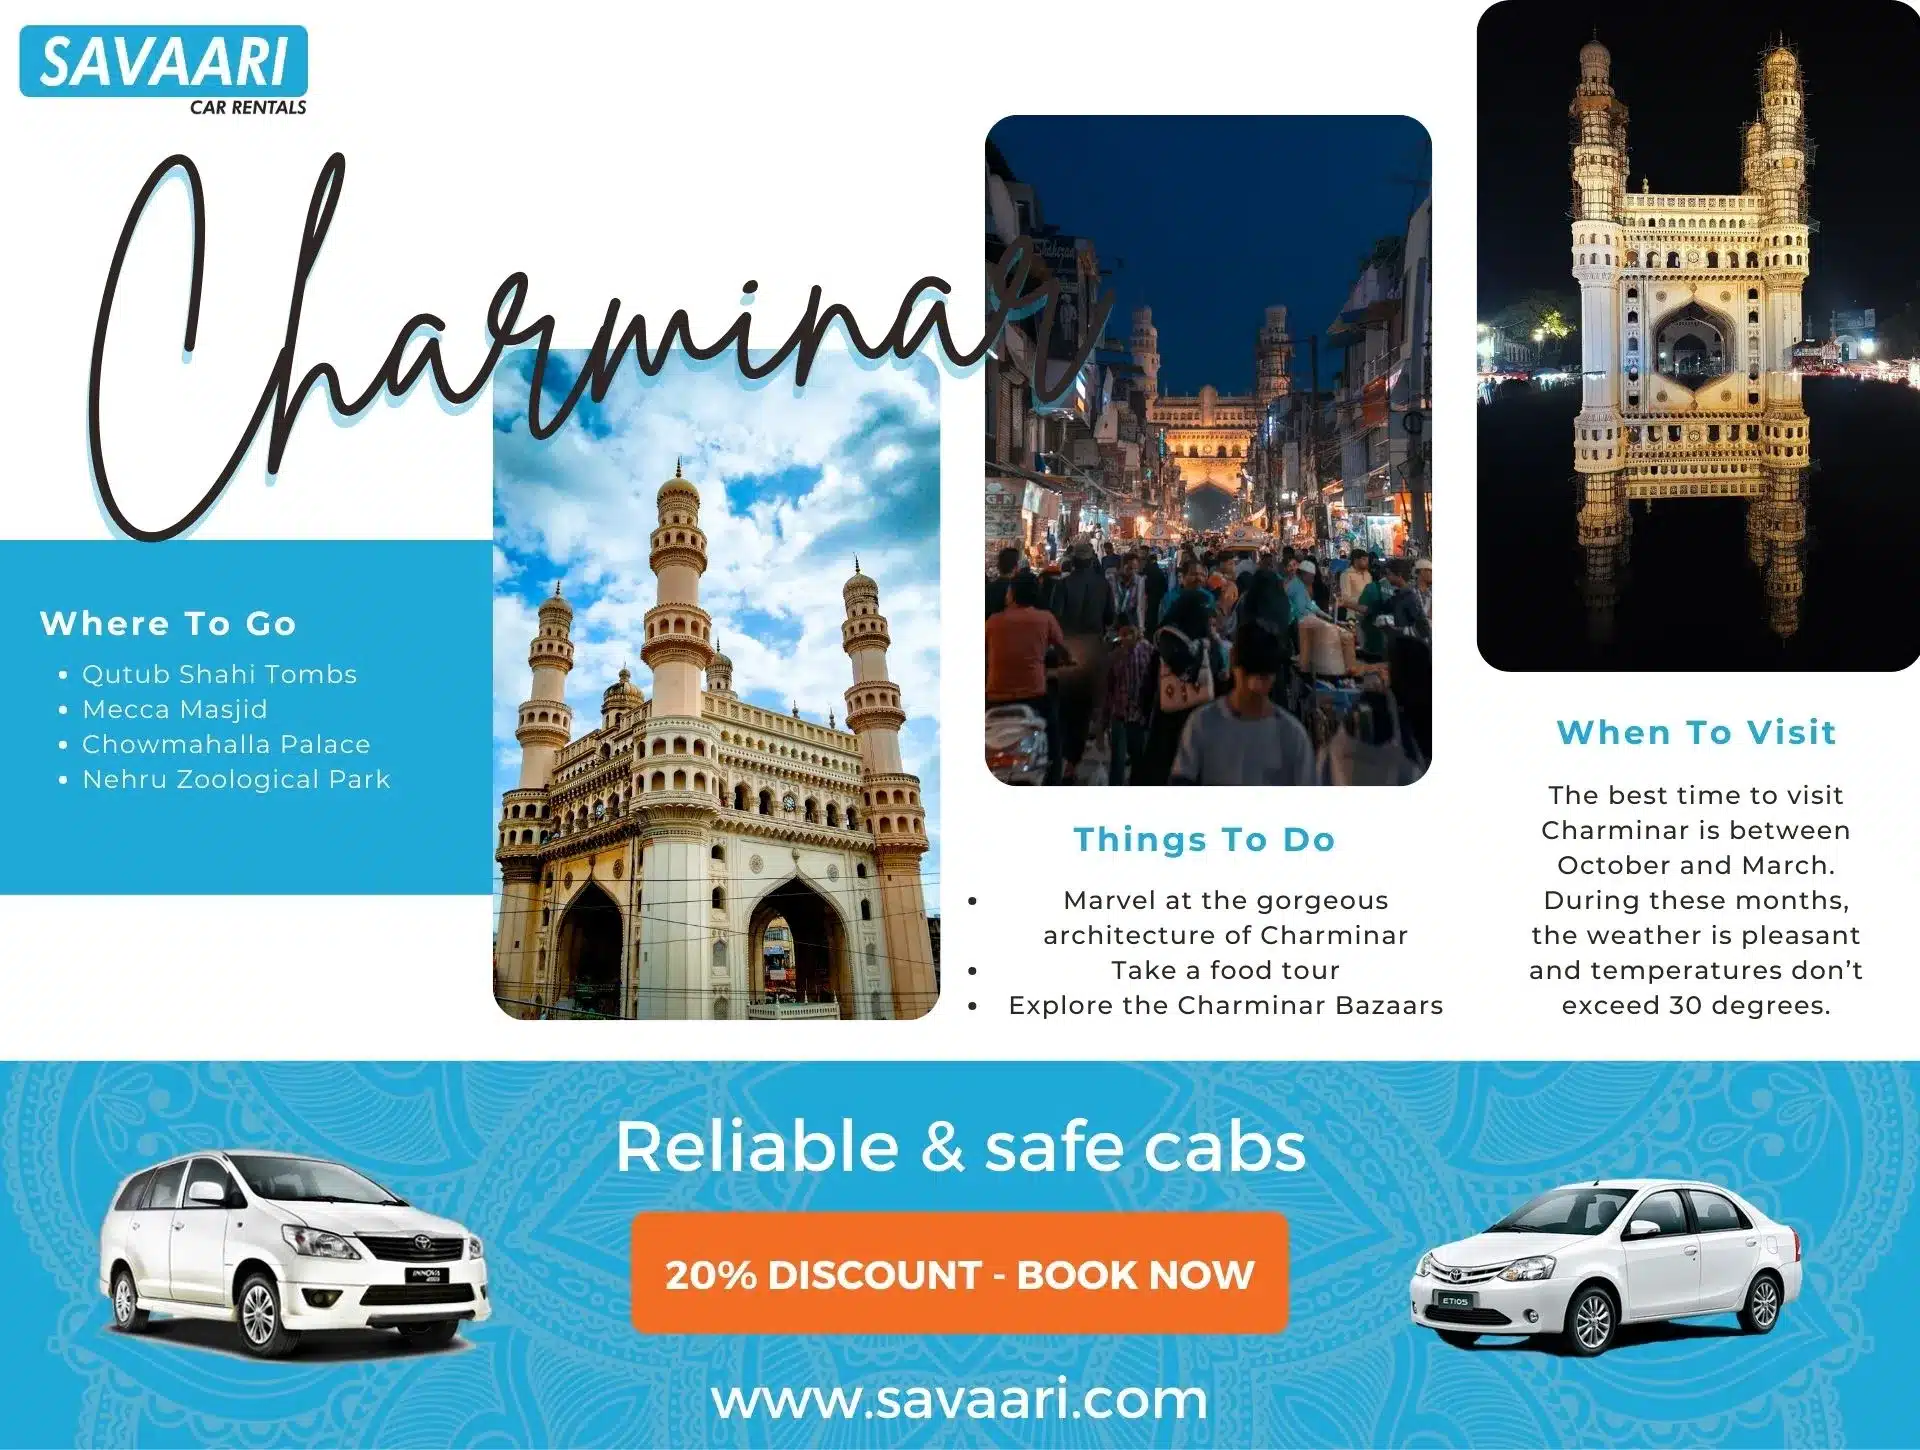 Things to do in Charminar